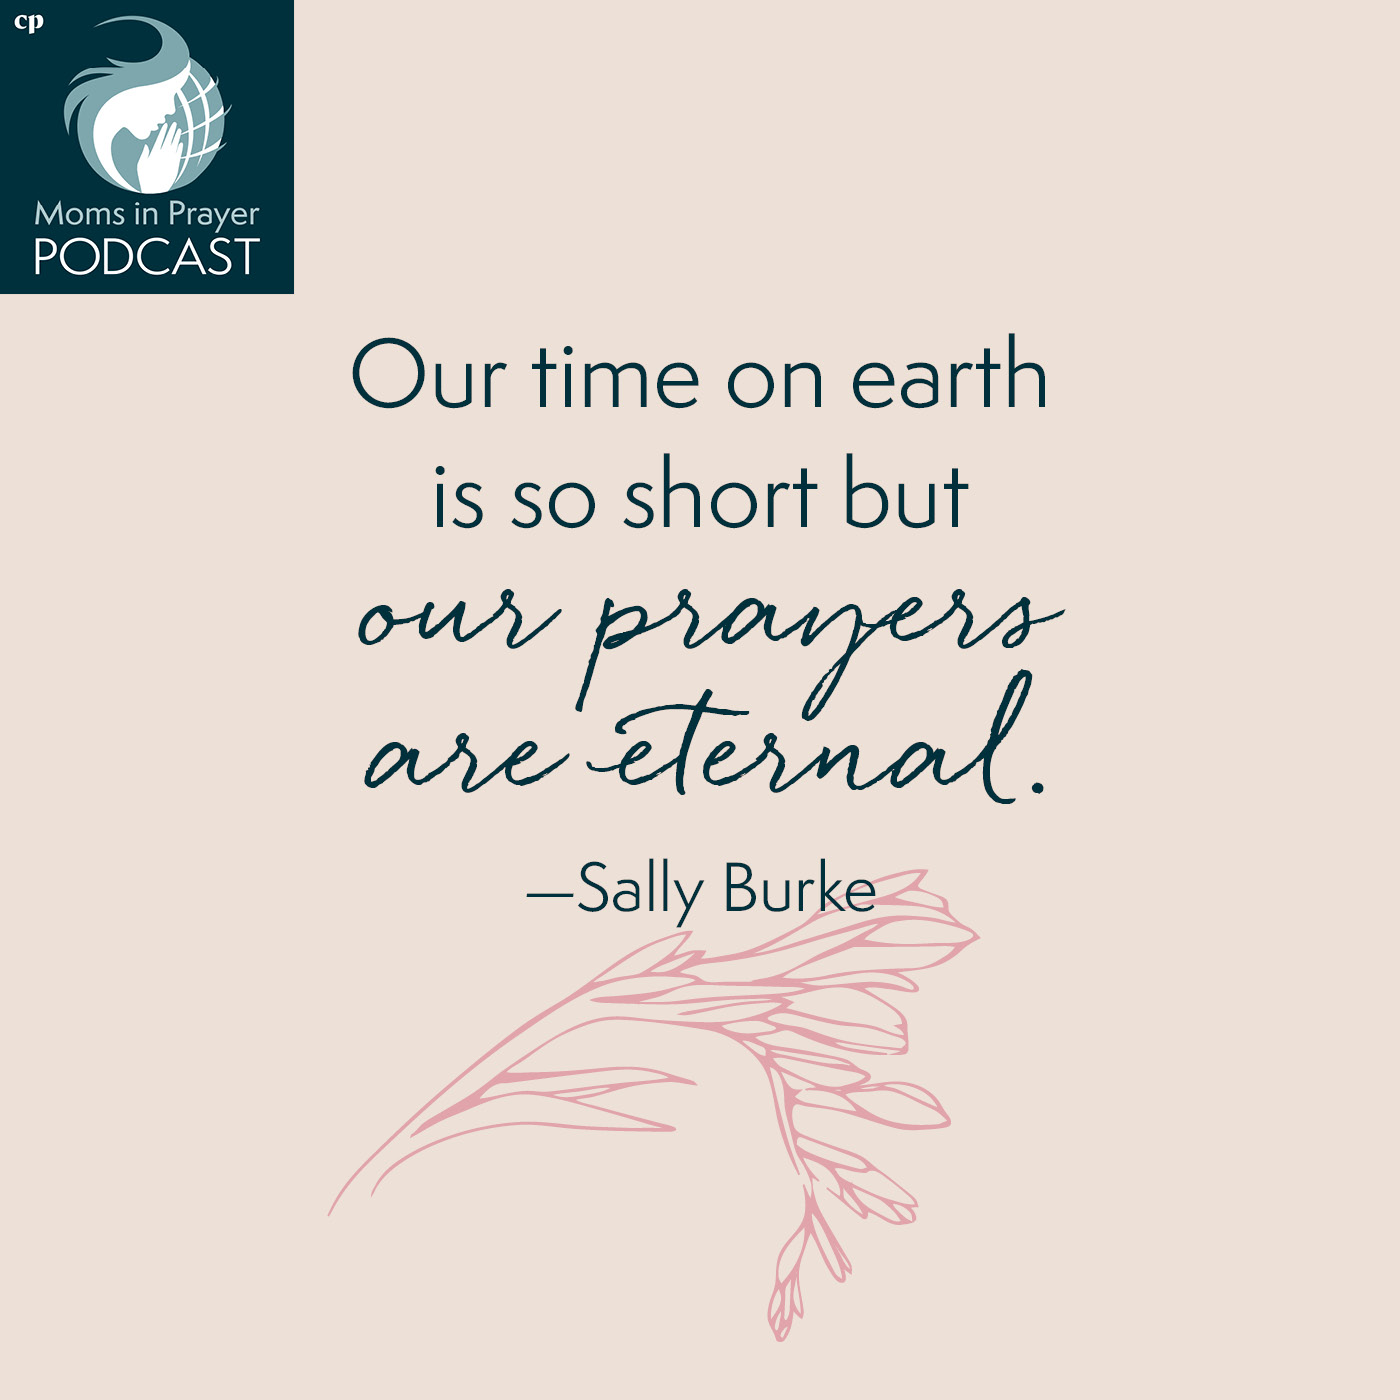 Our time on earth is short, but our prayers are eternal, Sally Burke Podcast